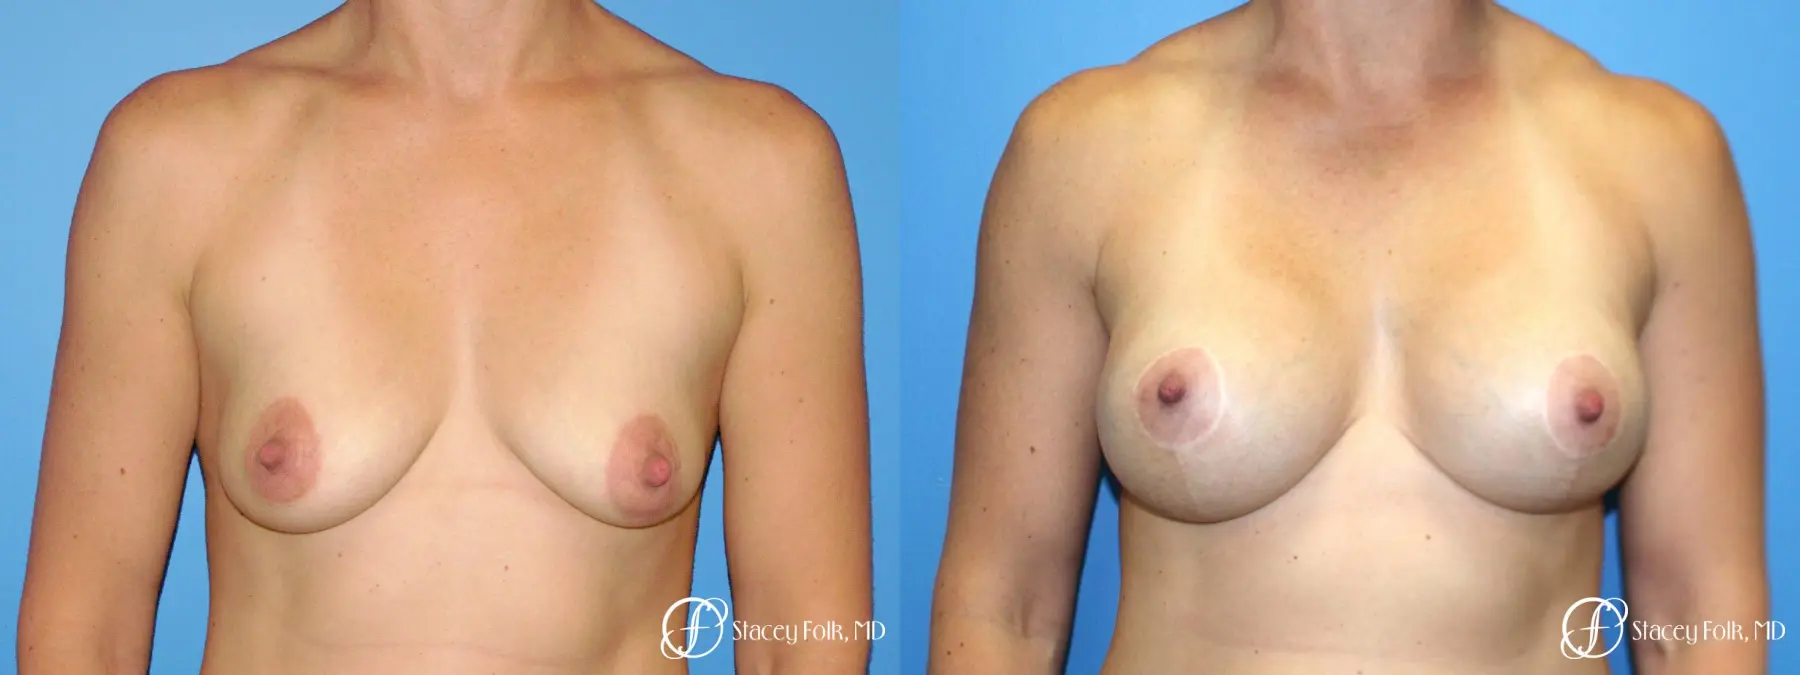 Denver Breast Augmentation with a Breast Lift - Mastopexy 8361 - Before and After